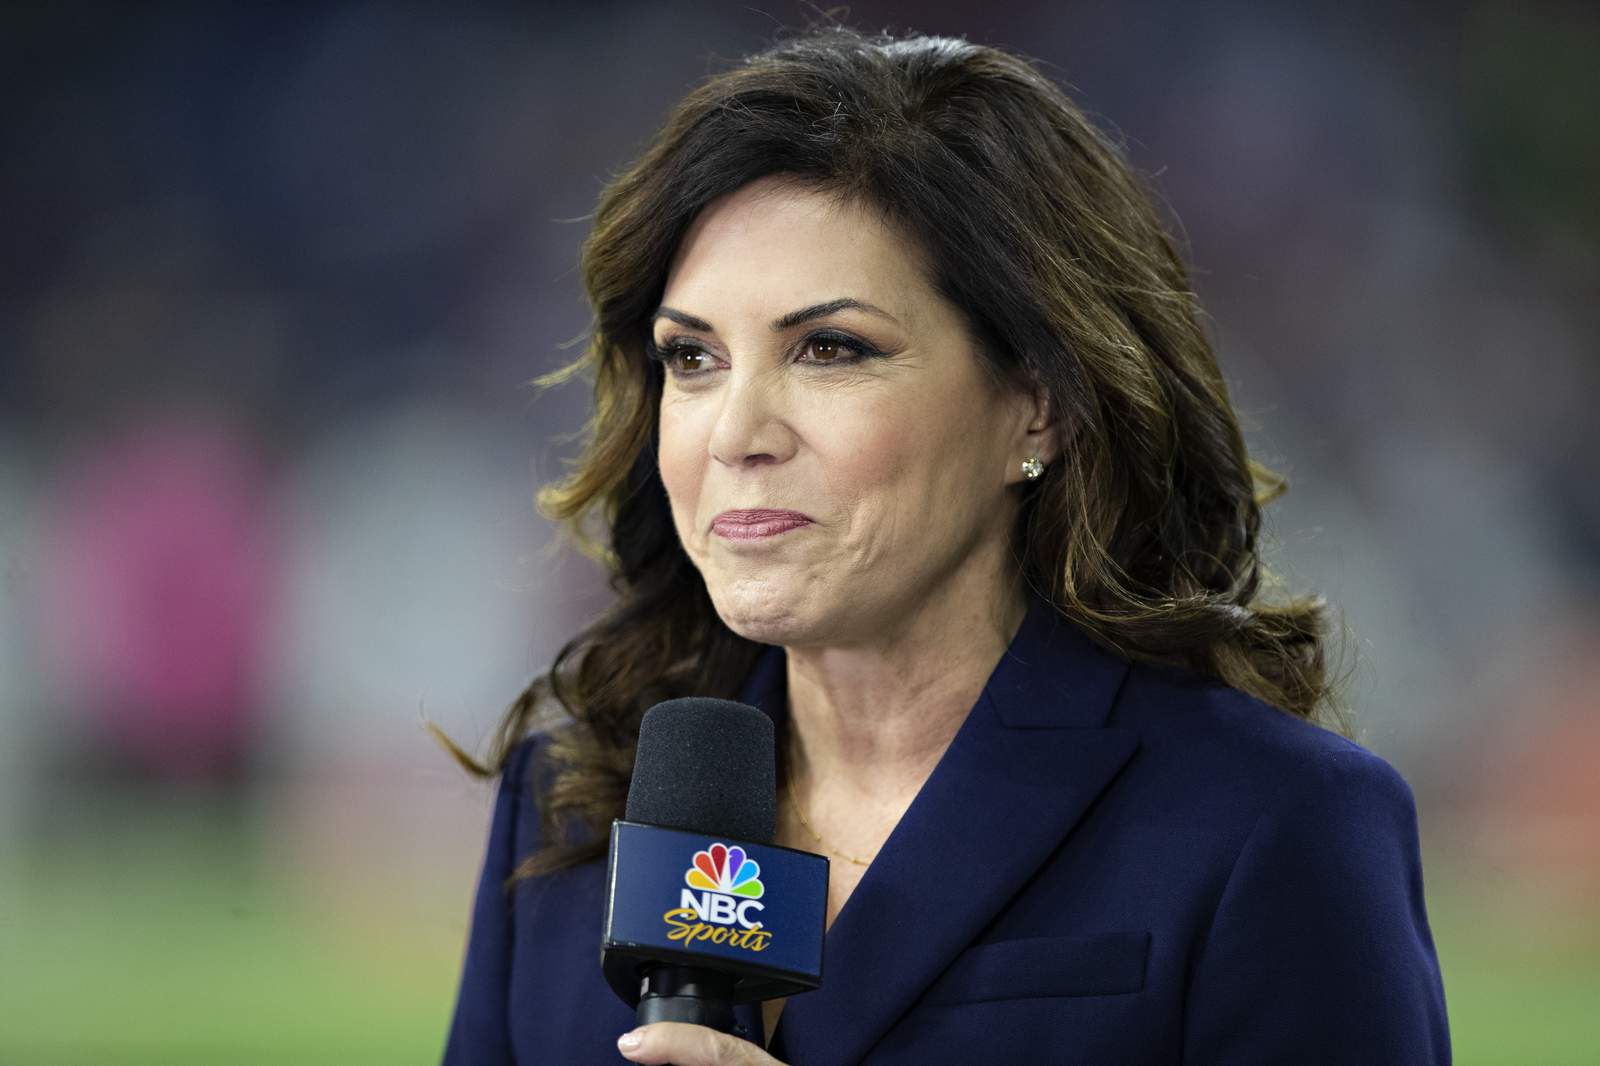 Michele Tafoya talks Texans-Chiefs, adapting as a sideline reporter with COVID-19 restrictions